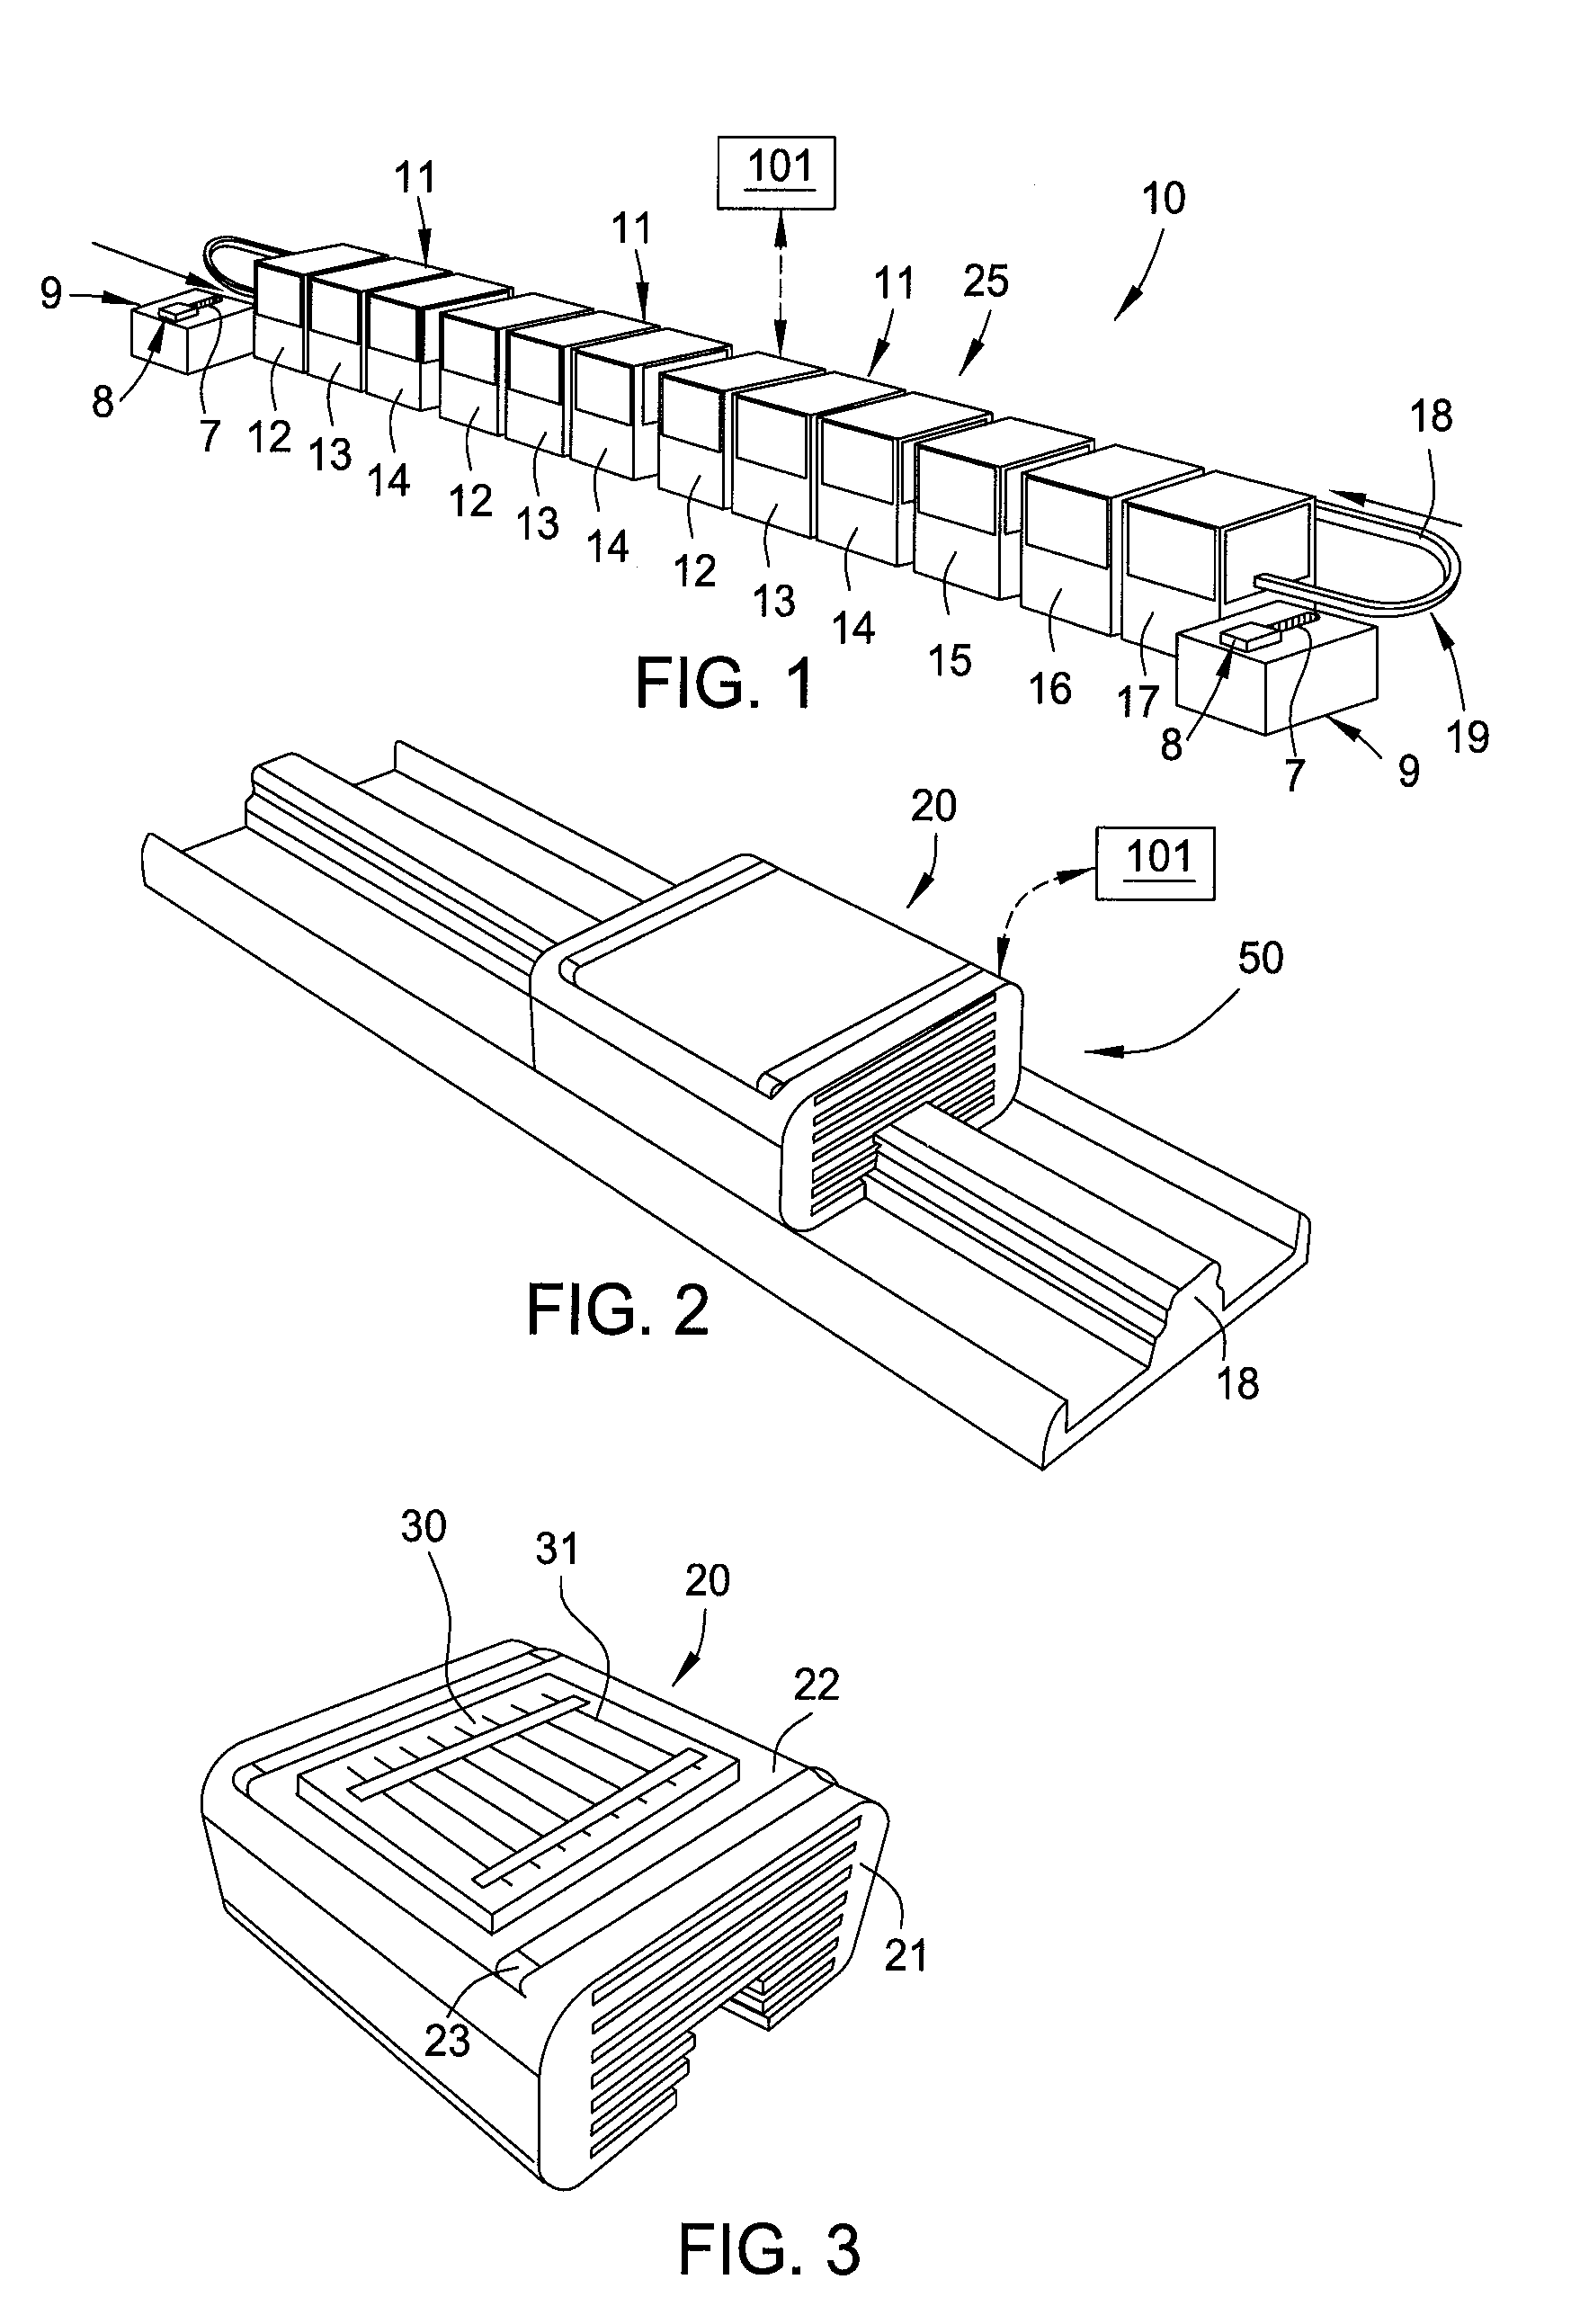 Plant for forming electronic circuits on substrates